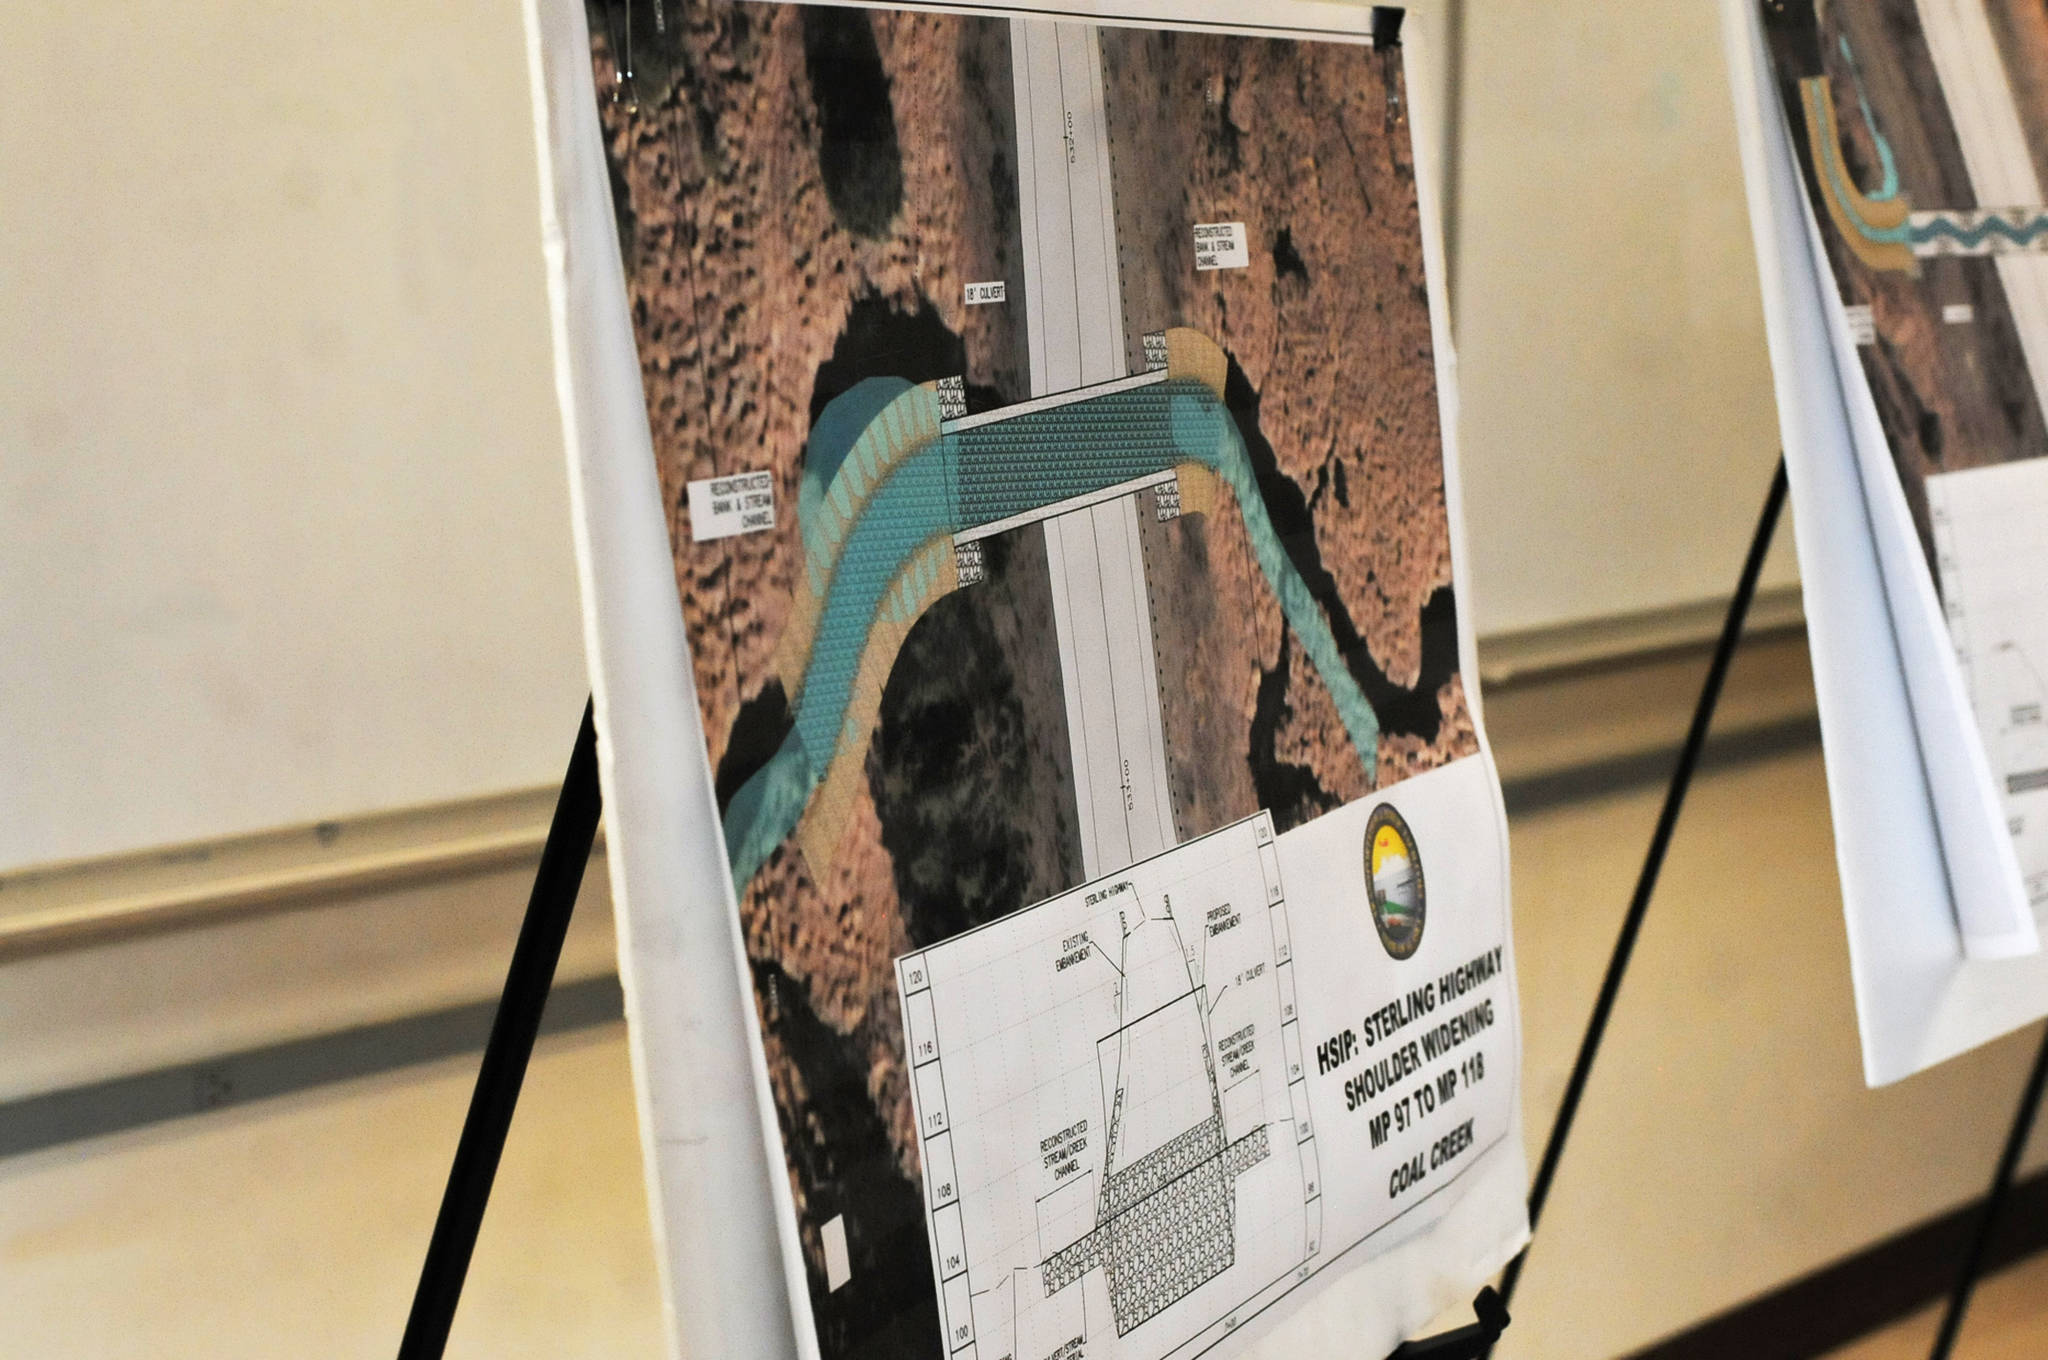 Maps of proposed culvert improvements on several Kasilof-area streams stand in a multipurpose room at Tustumena Elementary School during an Alaska Department of Transportation and Public Facilities open house on a proposed safety improvement project on the Sterling Highway between Soldotna and Clam Gulch on Wednesday in Kasilof. The project, scheduled for summer 2018 and 2019, will include widened shoulders, improved signage, a safety edge and culvert replacements, among other improvements. (Elizabeth Earl/Peninsula Clarion)